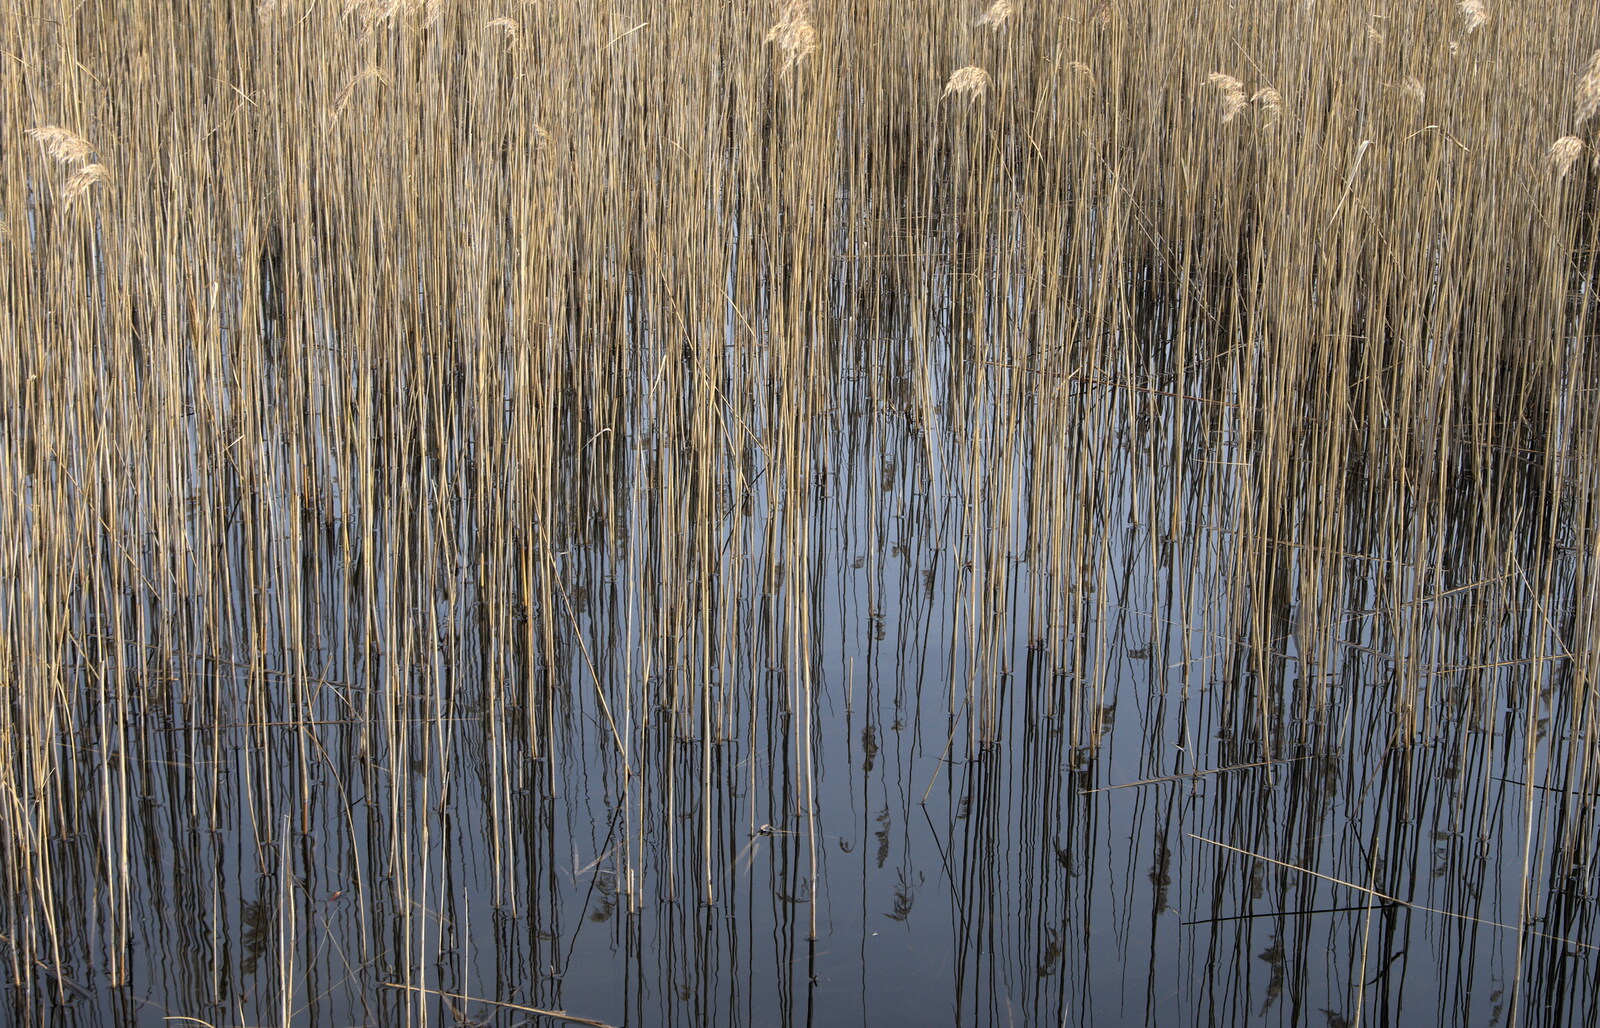 Reeds in dark water from Redgrave and Lopham Fen, Suffolk Border - 11th March 2017